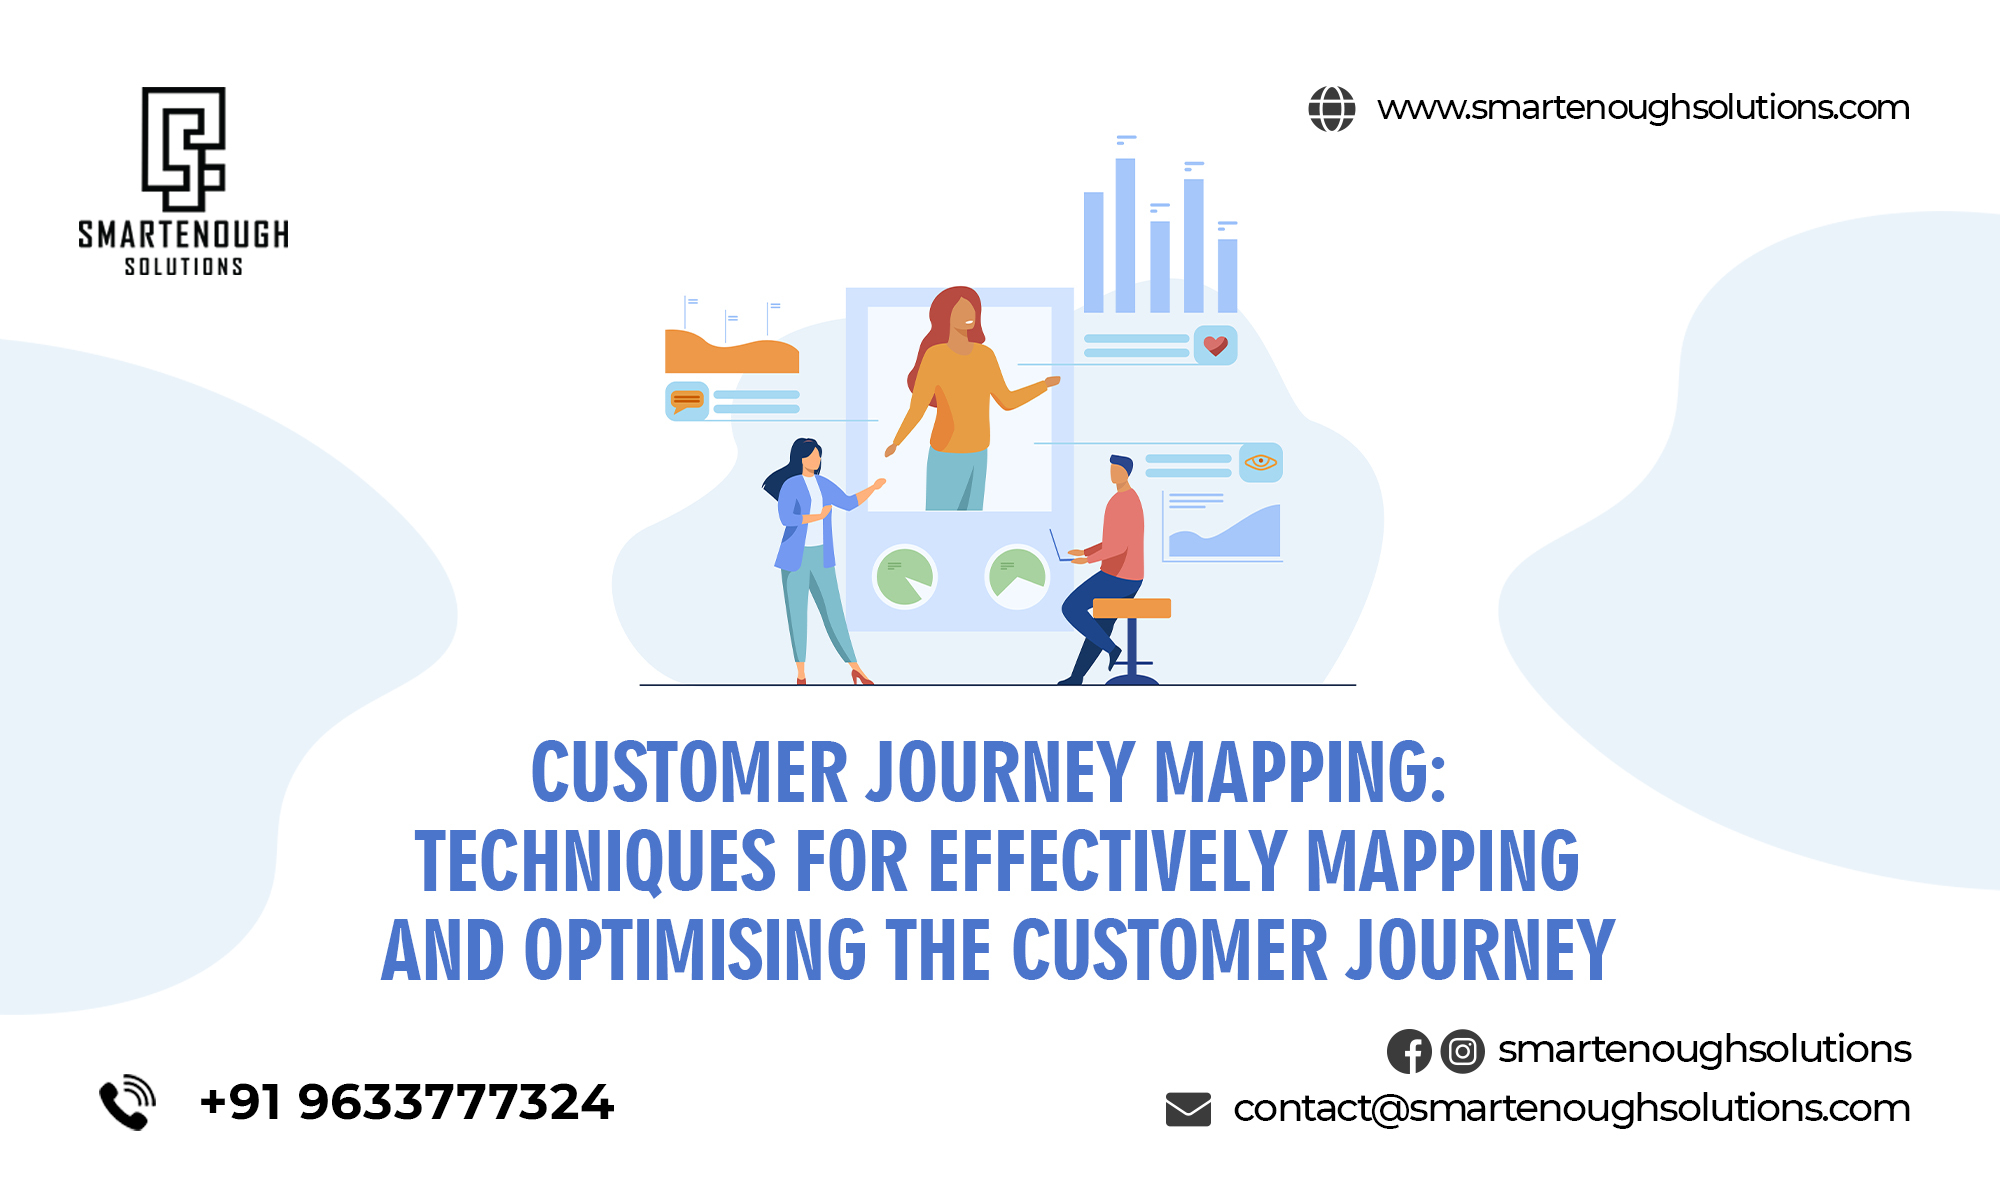 Customer Journey Mapping: Techniques for Effectively Mapping and Optimising the Customer Journey